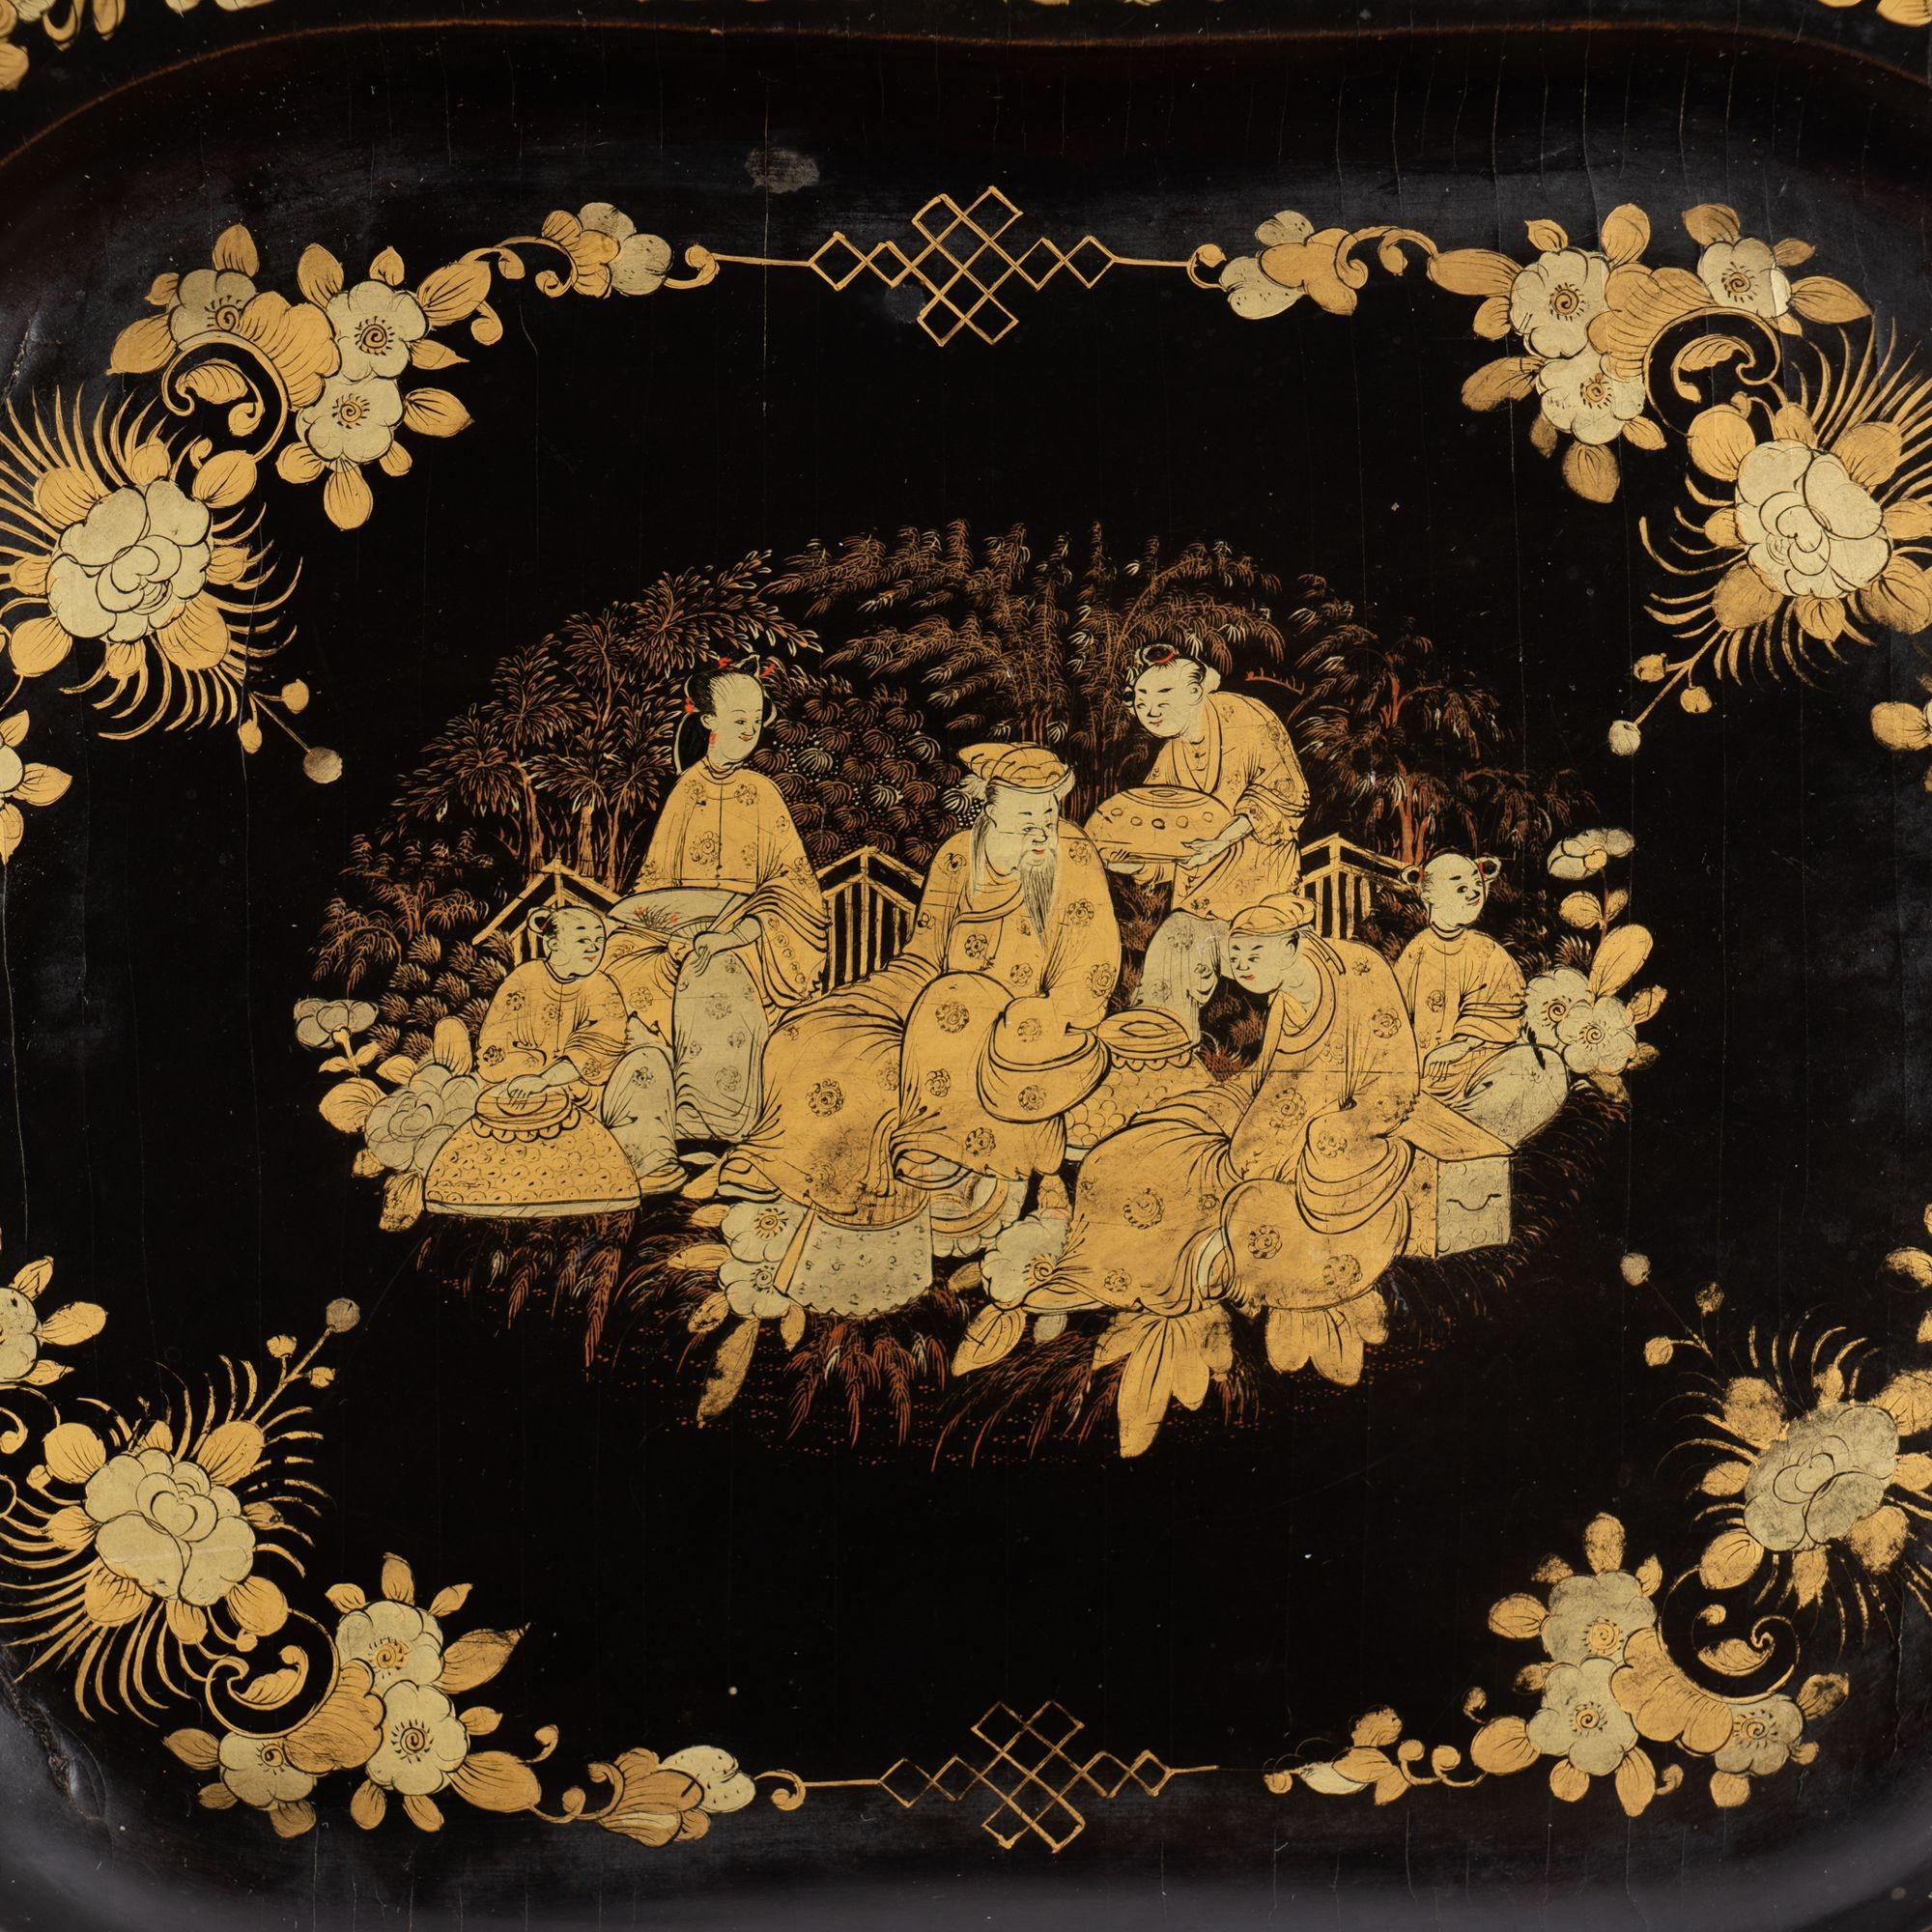 Chinese octagonal gilt decorated black lacquer tray with shaped border. A largely symmetrical floral border design frames a gathering of people at the center of the tray.

China, made for the Western trade, circa 1825.